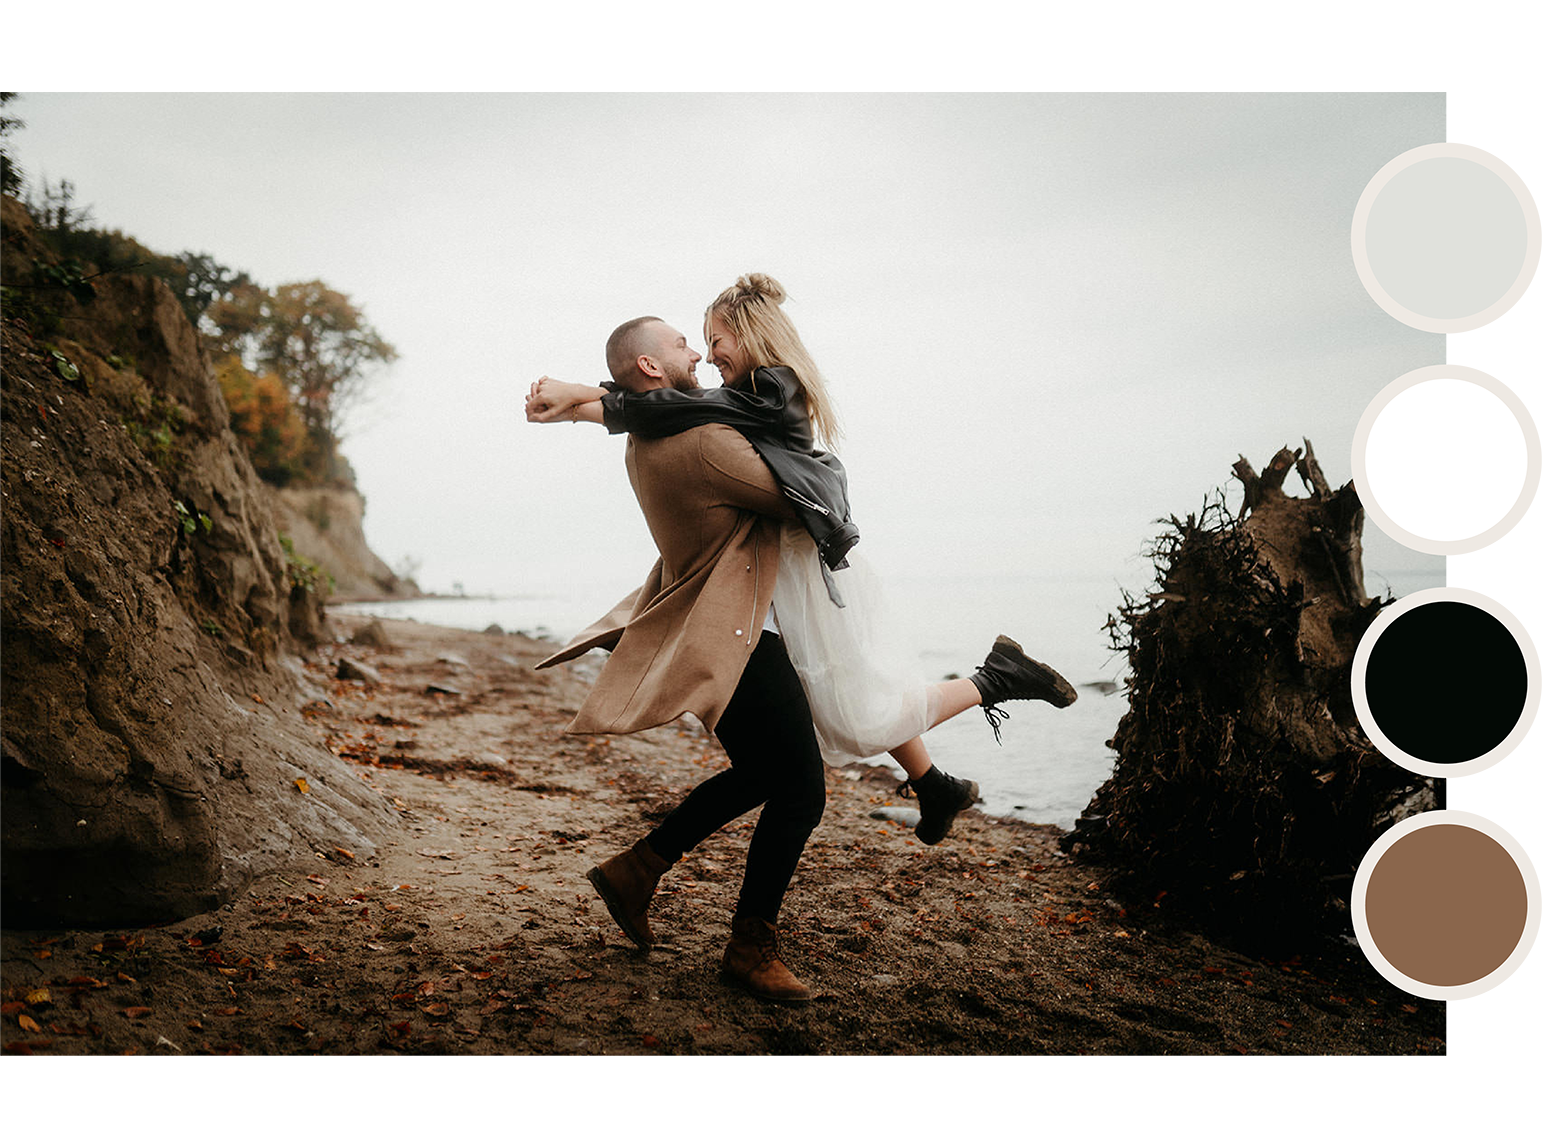 Couple spinning around on the beach. It's a rainy and dark mood. He is wearing a camel woolcoat, a black jeans and brown leather boots. She is wearing a white wedding dress, black leather boots and a leather jacket.